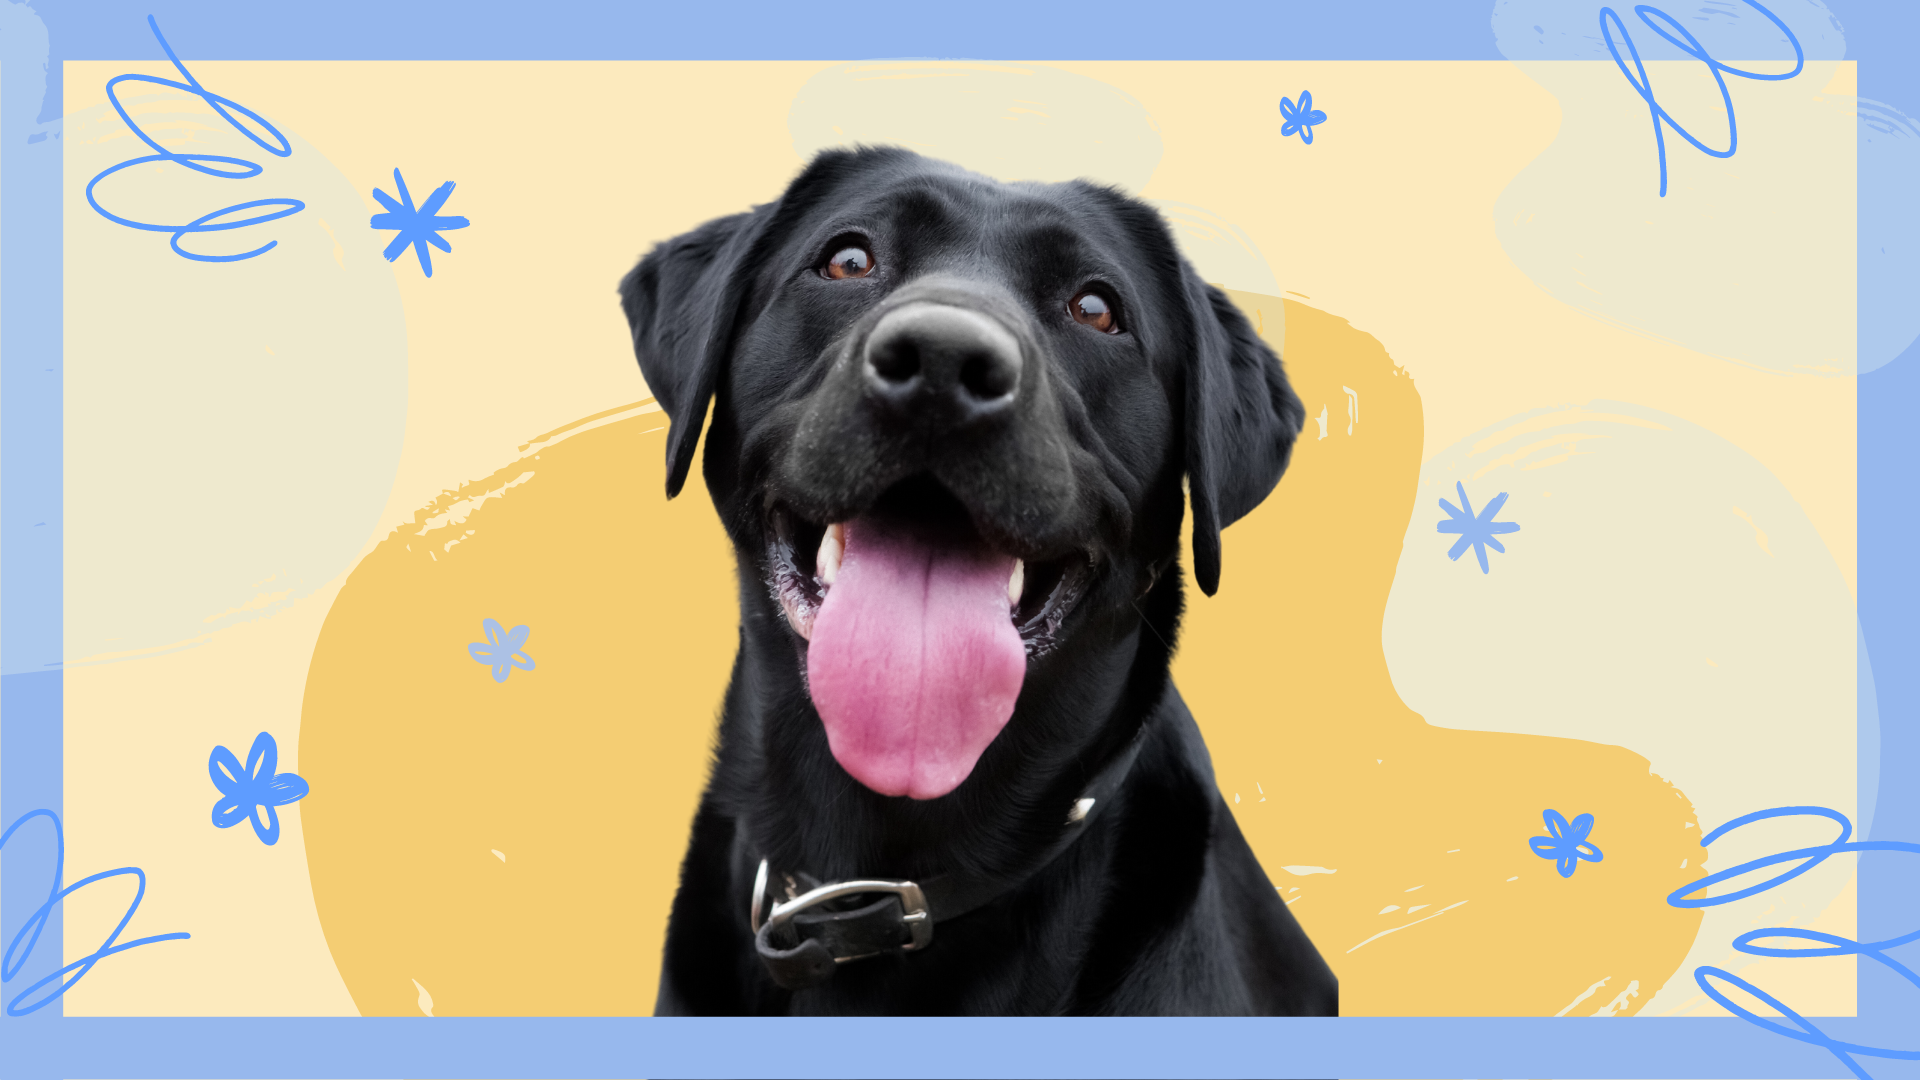 Black Lab dog with his tongue out in front of yellow and blue swirly background